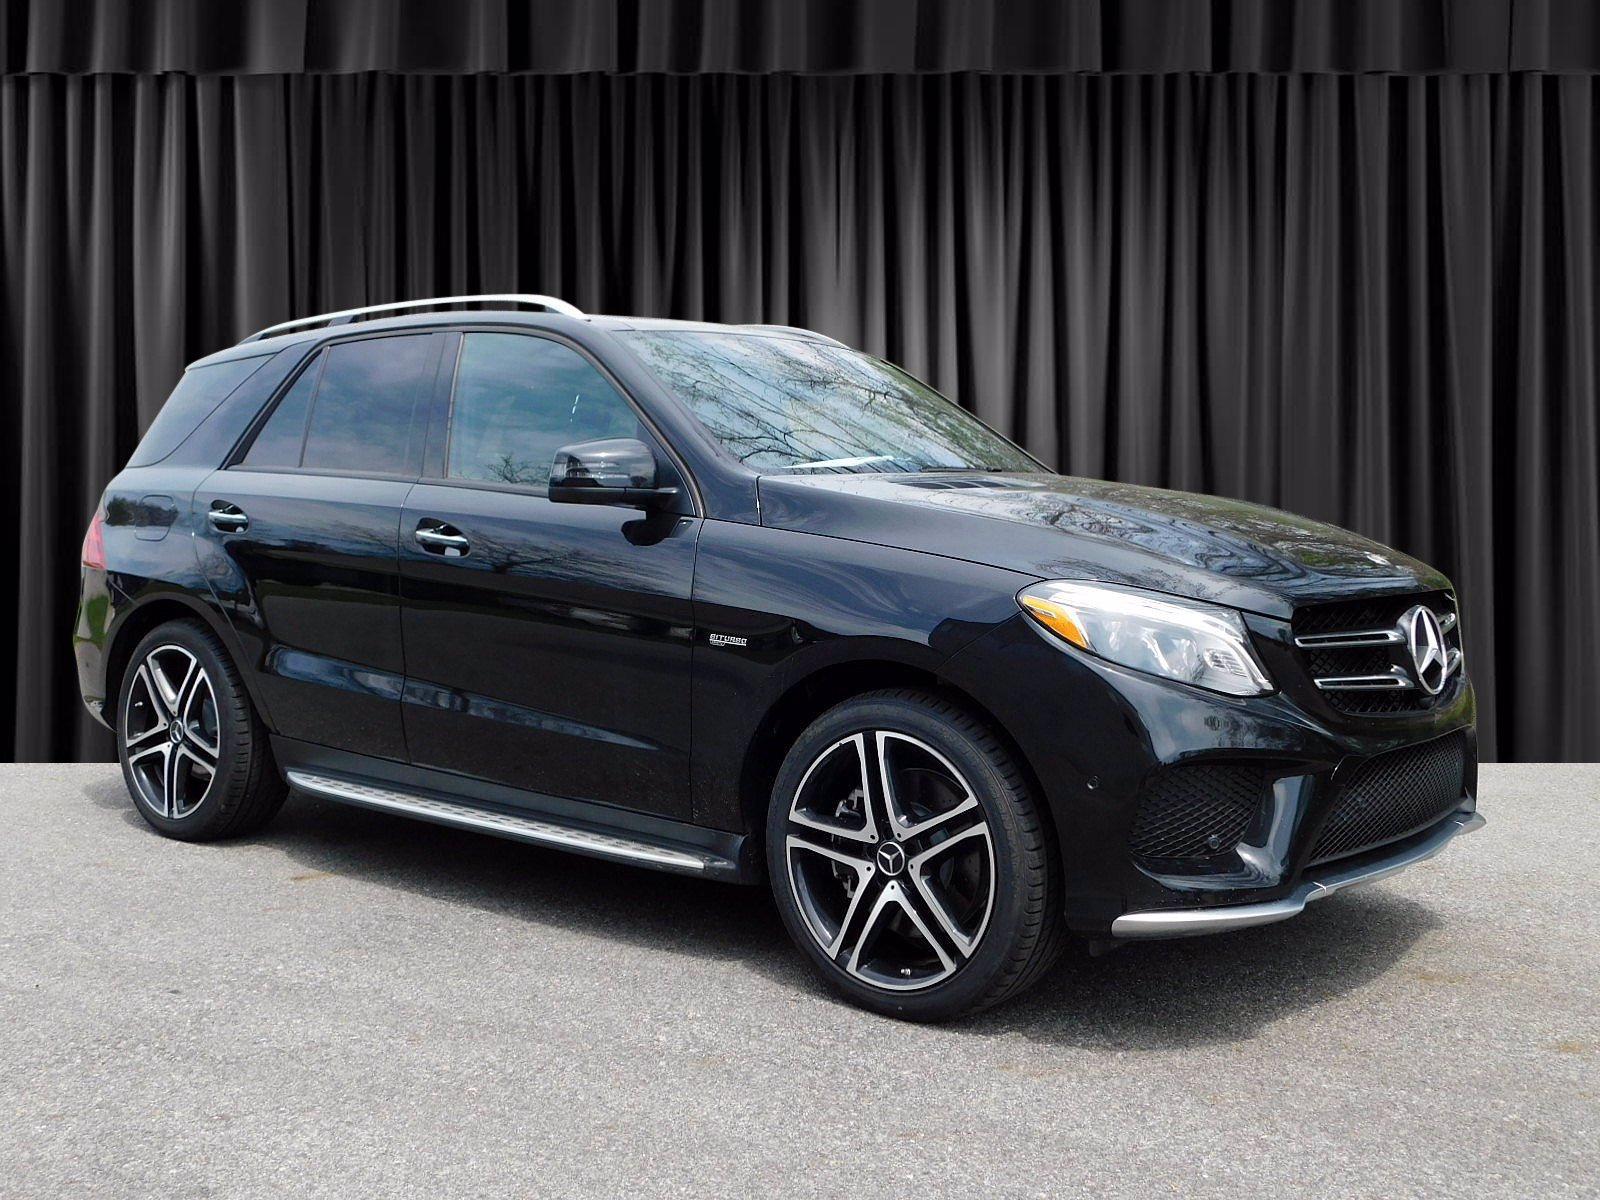 New 2019 Mercedes Benz Amg Gle 43 Suv Awd 4matic